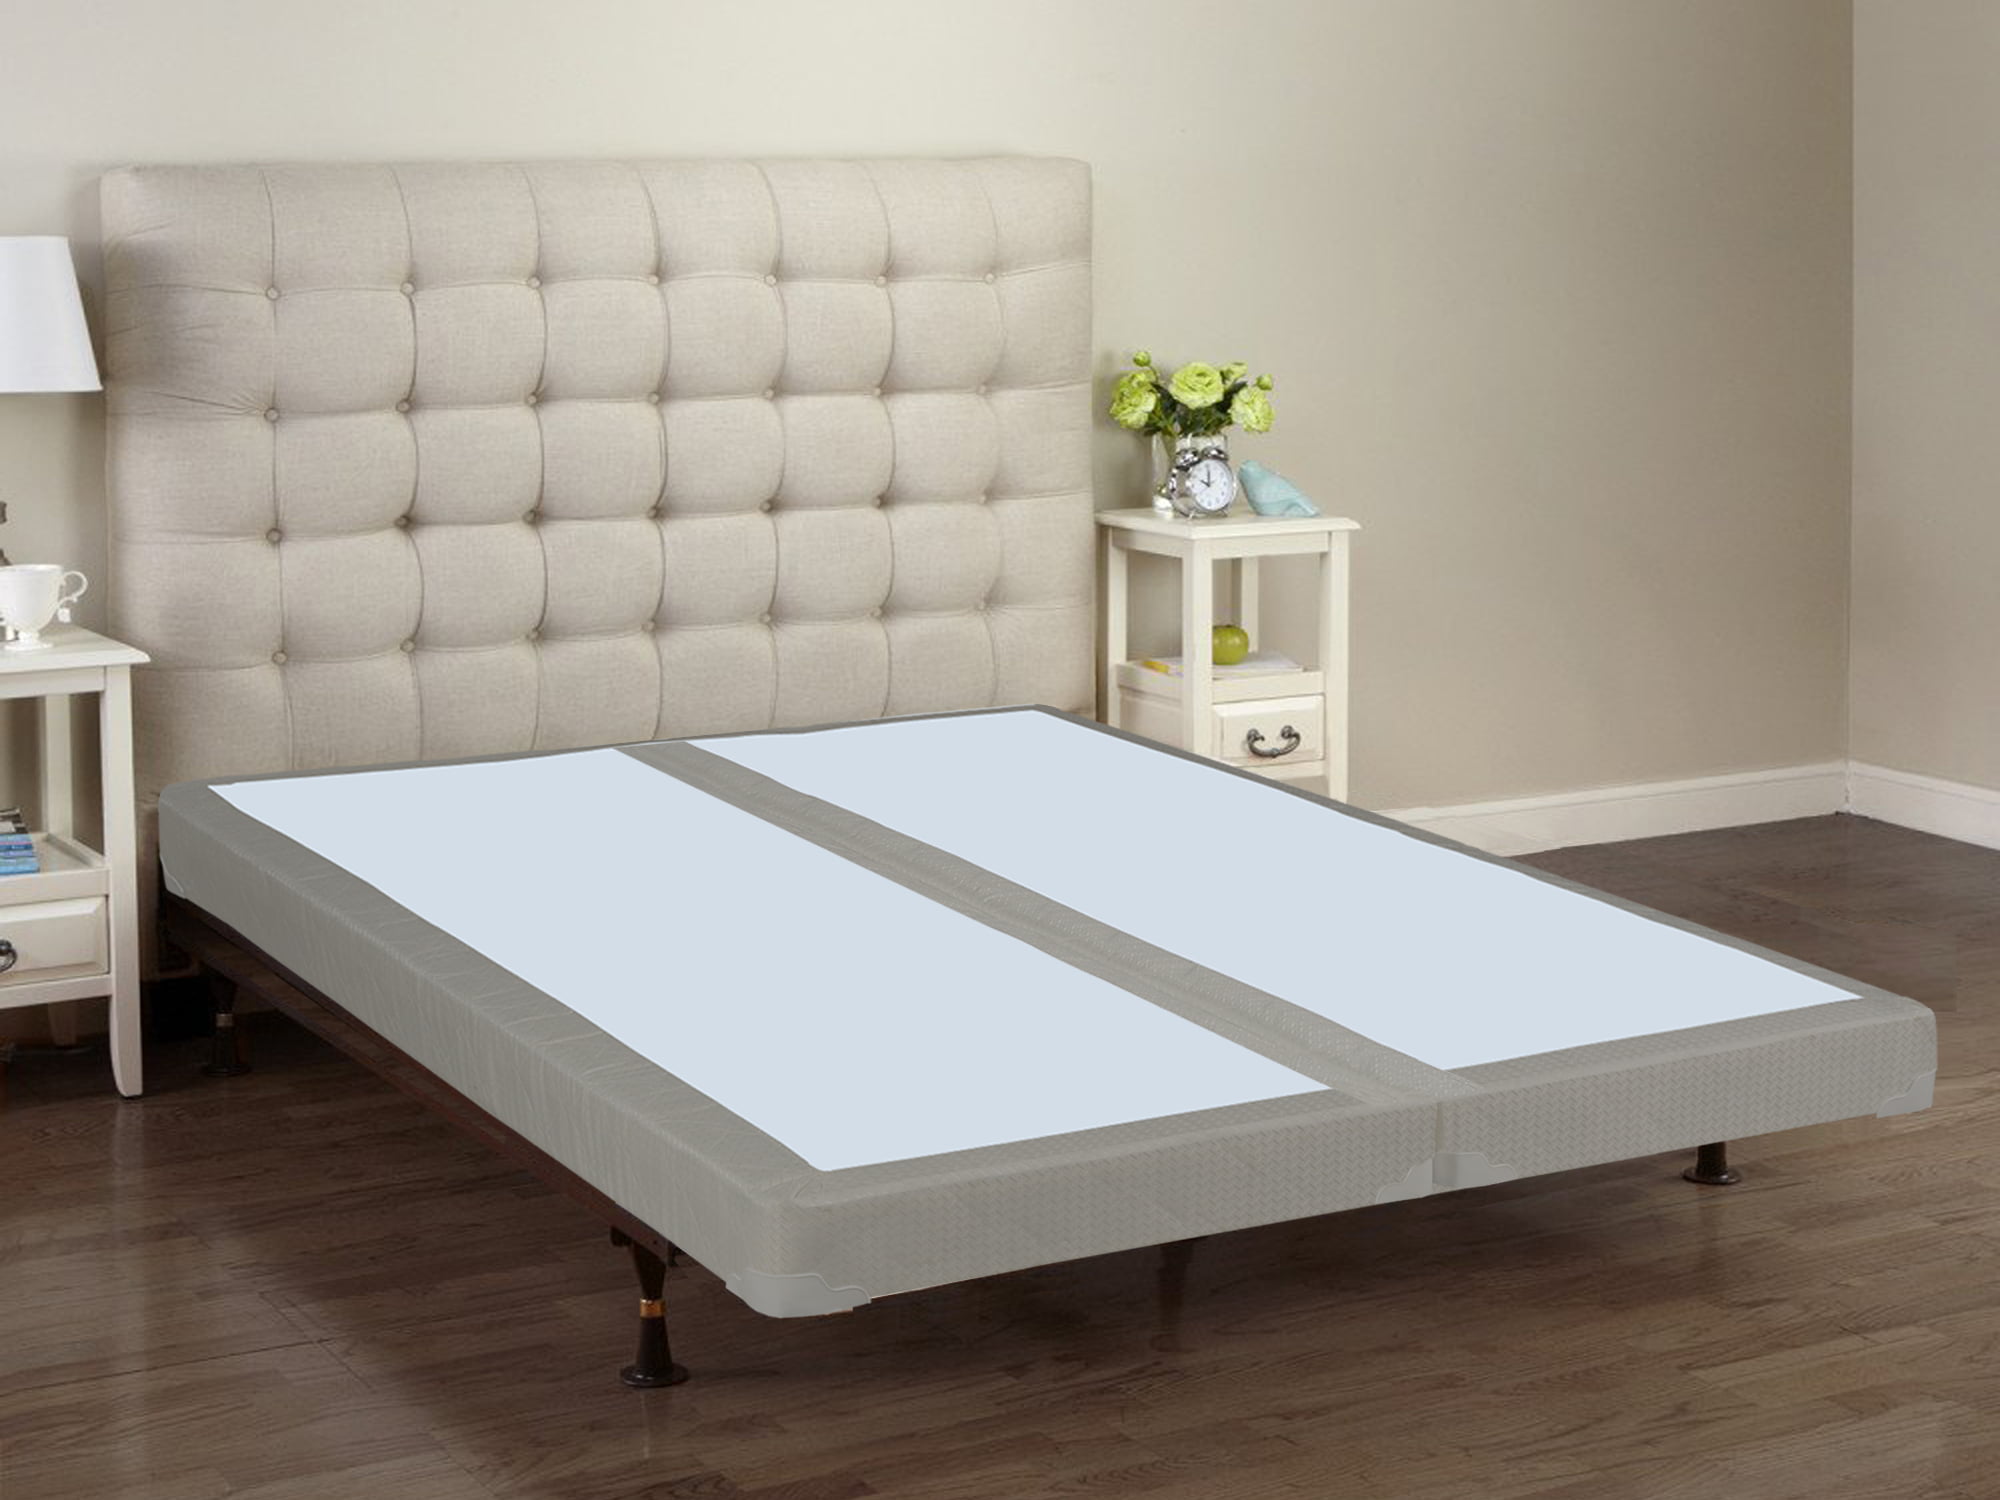 Continental Sleep, 4" Fully Assembled Split Box Spring/Foundation For Mattress, Queen Size